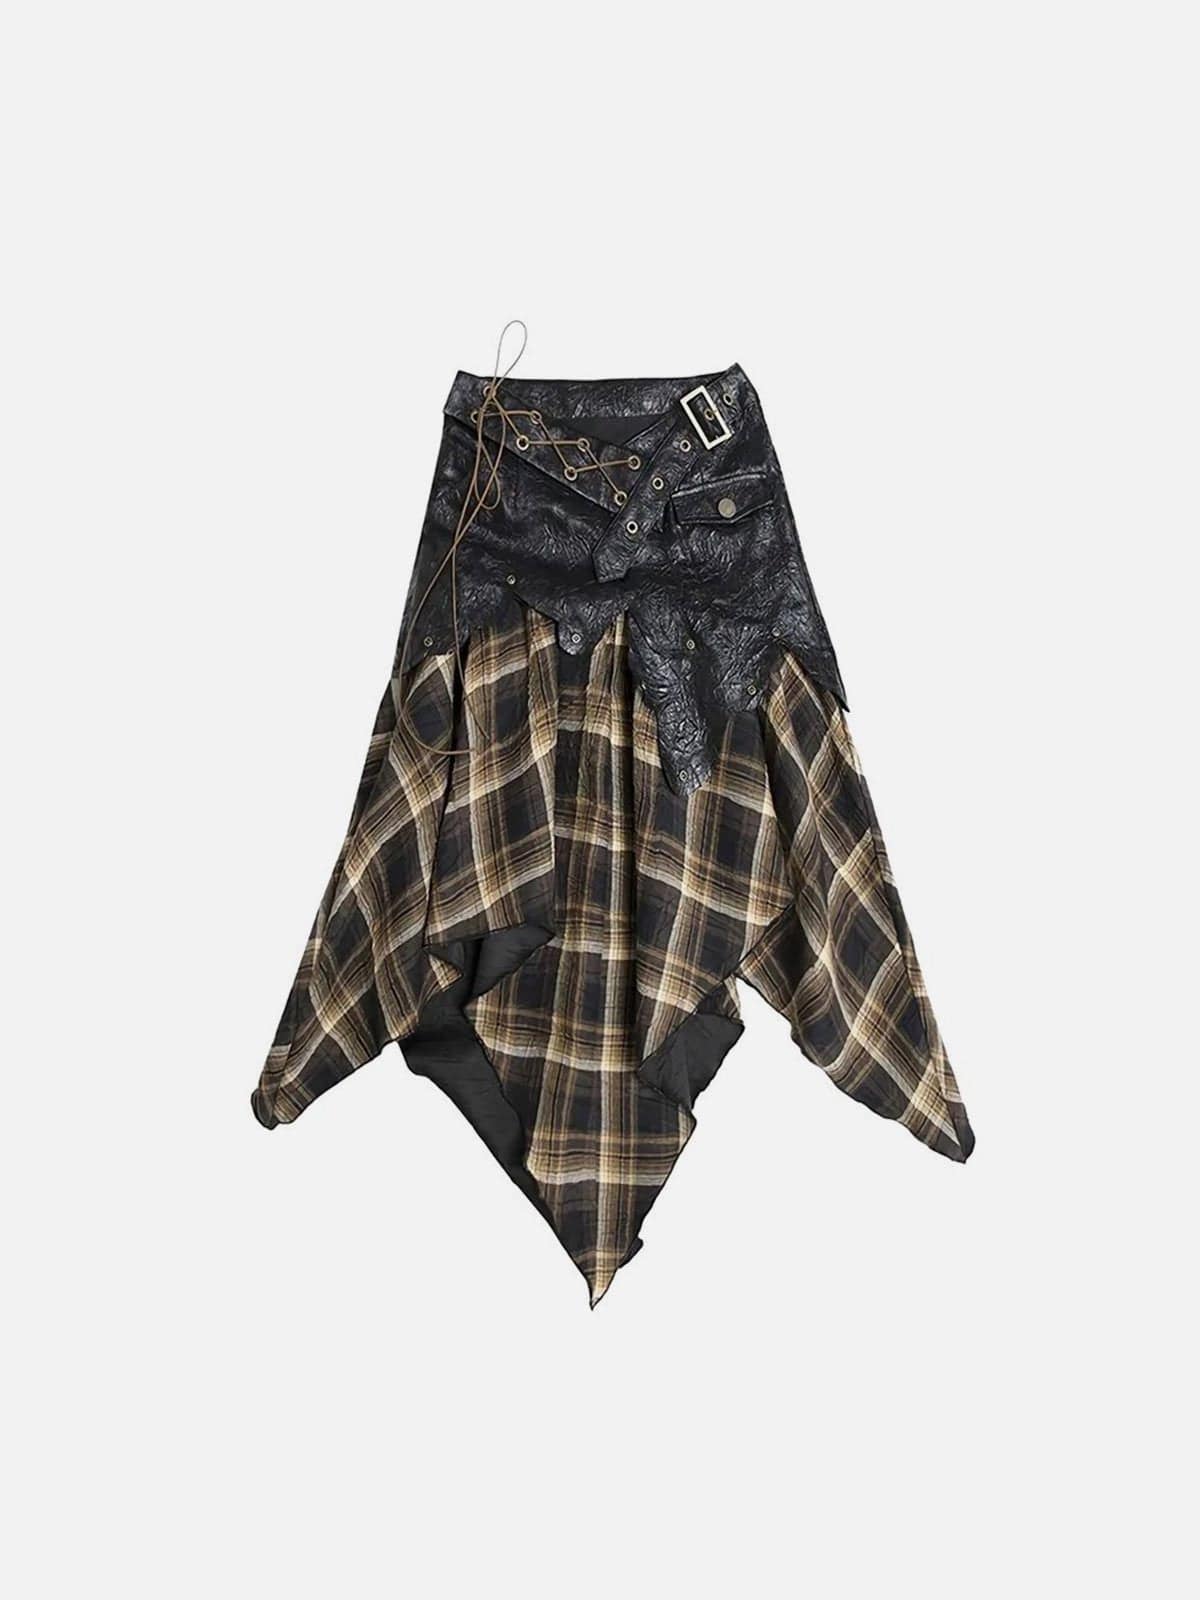 NEV Faux Leather Plaid Patchwork Skirts